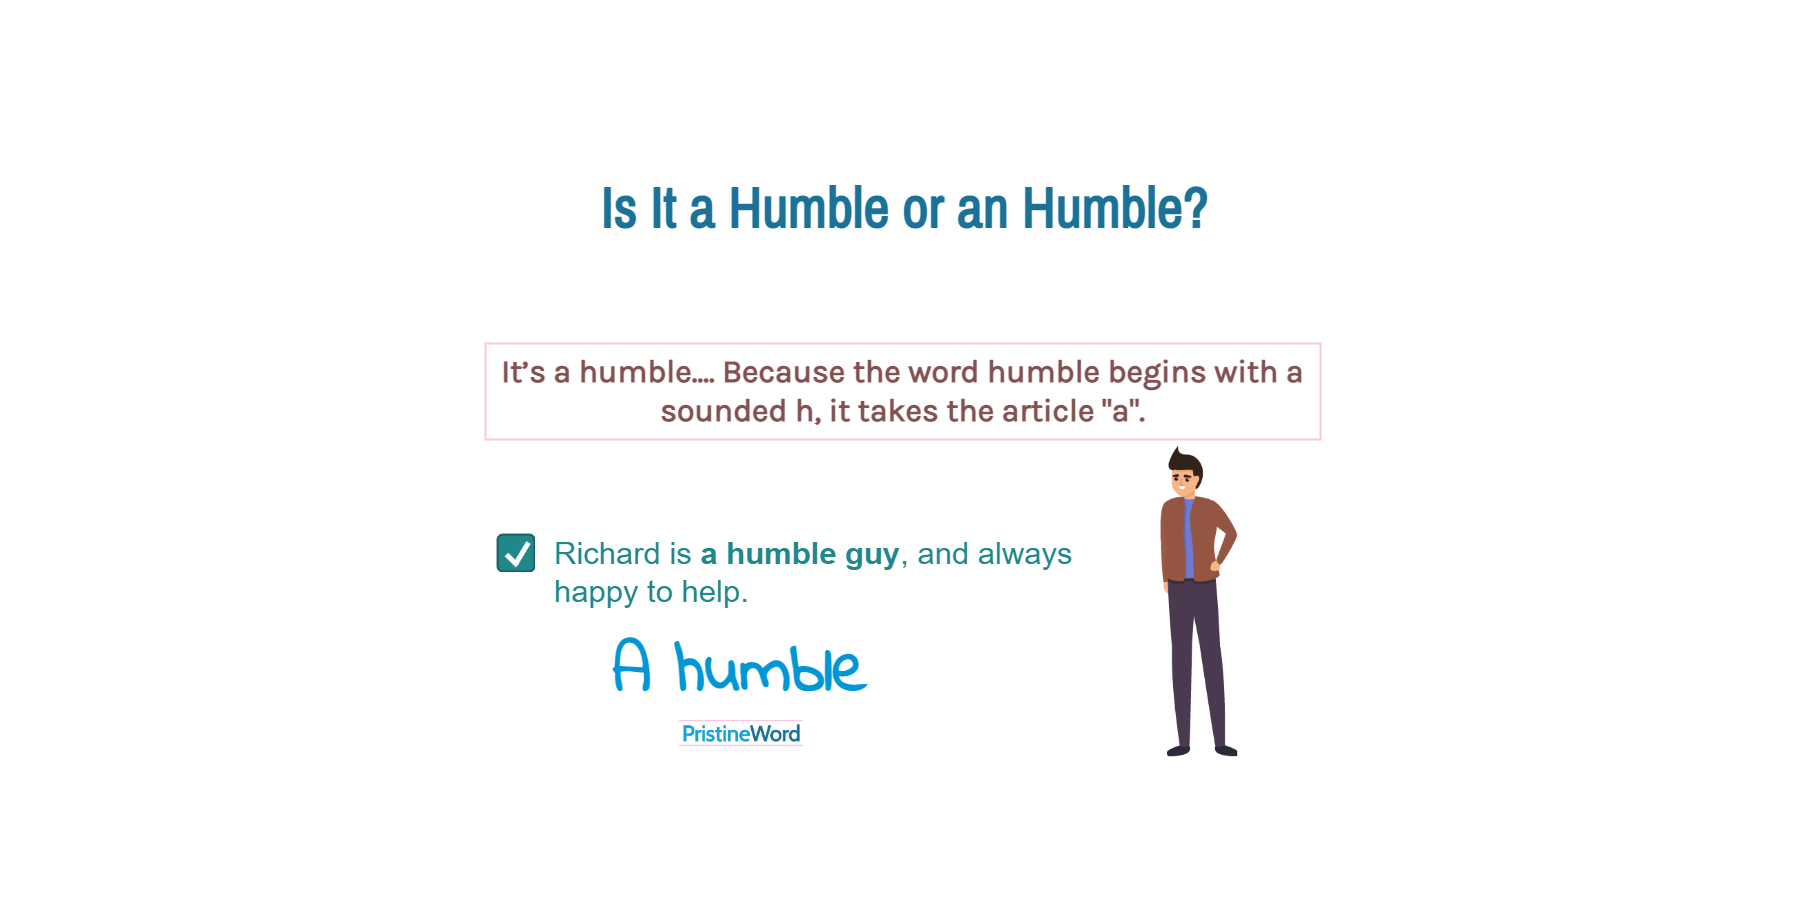 Is It a Humble or an Humble?